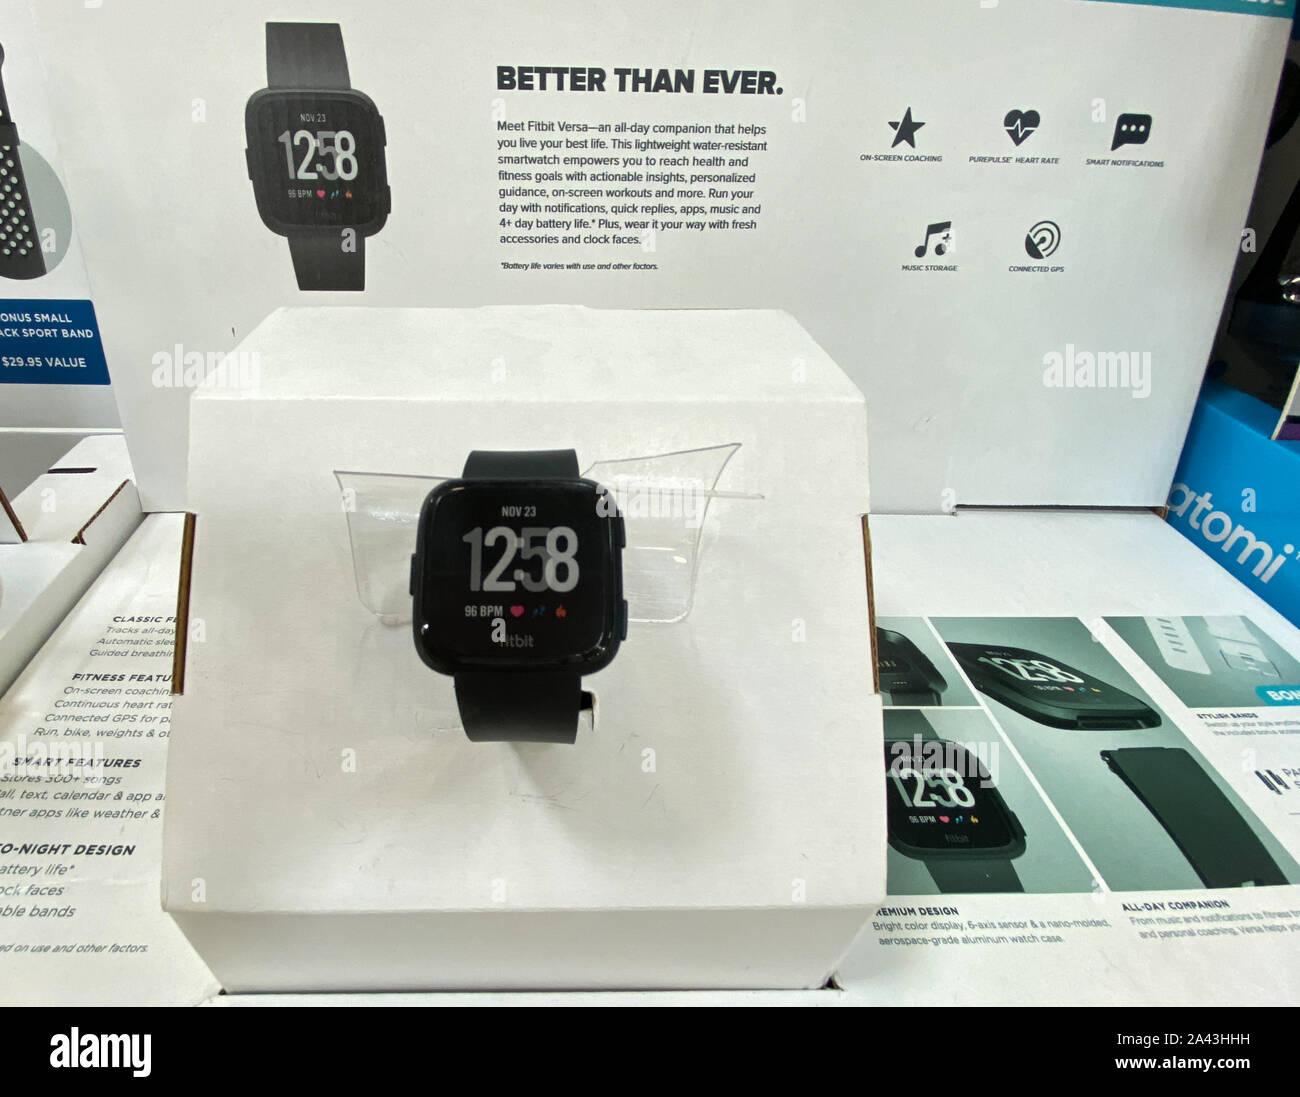 sam's club fitbit watches